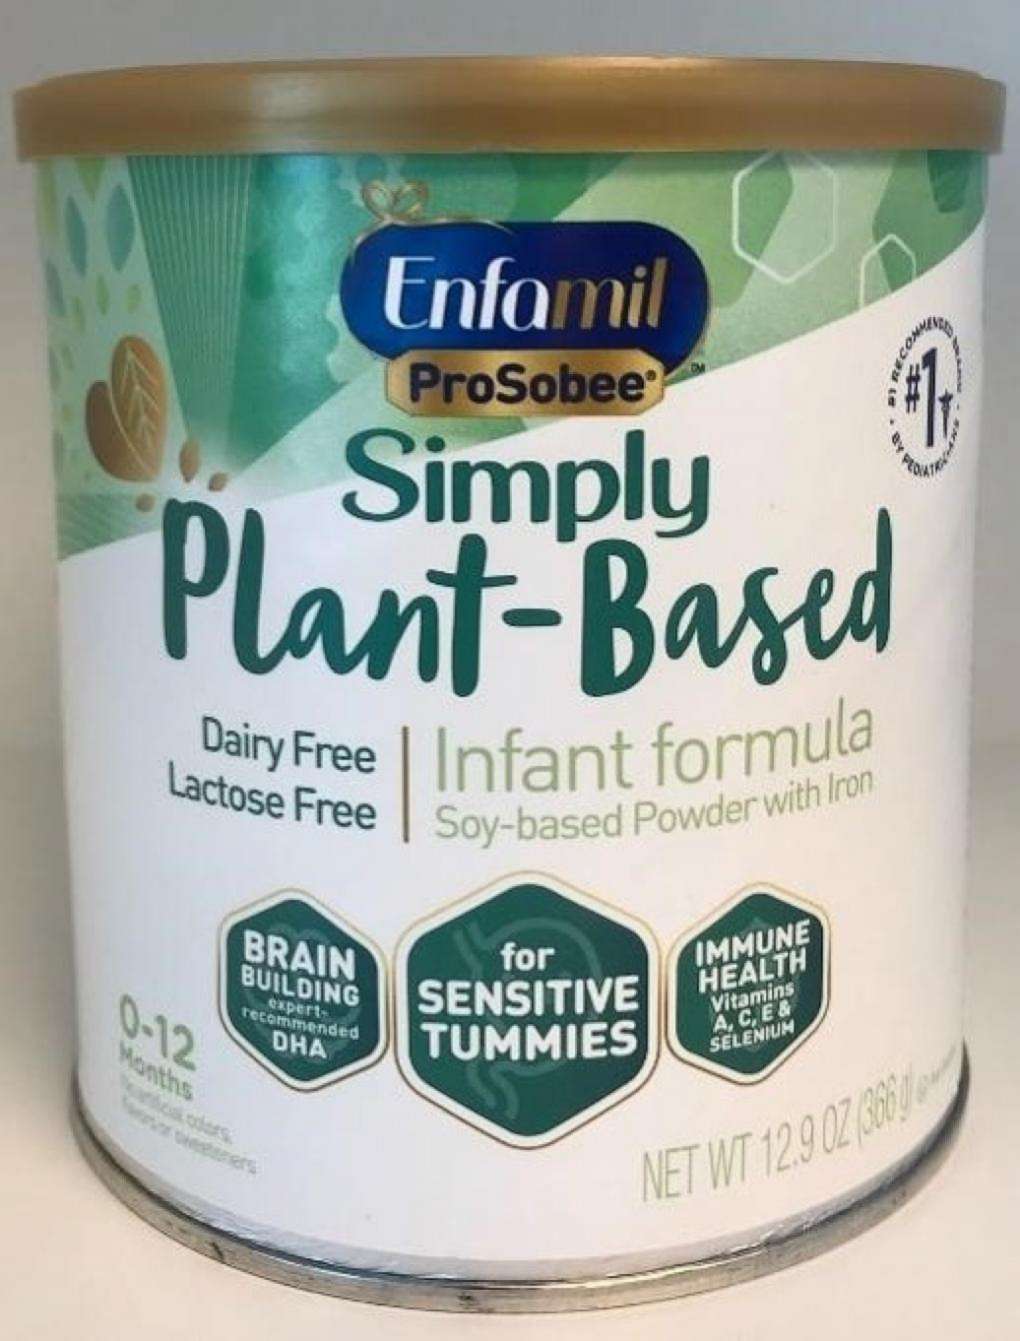 PHOTO: Reckitt, a British consumer goods company, said it would recall two batches of plant-based infant formula they produce on Monday, Feb. 20, 2023, due to "a possibility of cross-contamination with Cronobacter sakazakii."